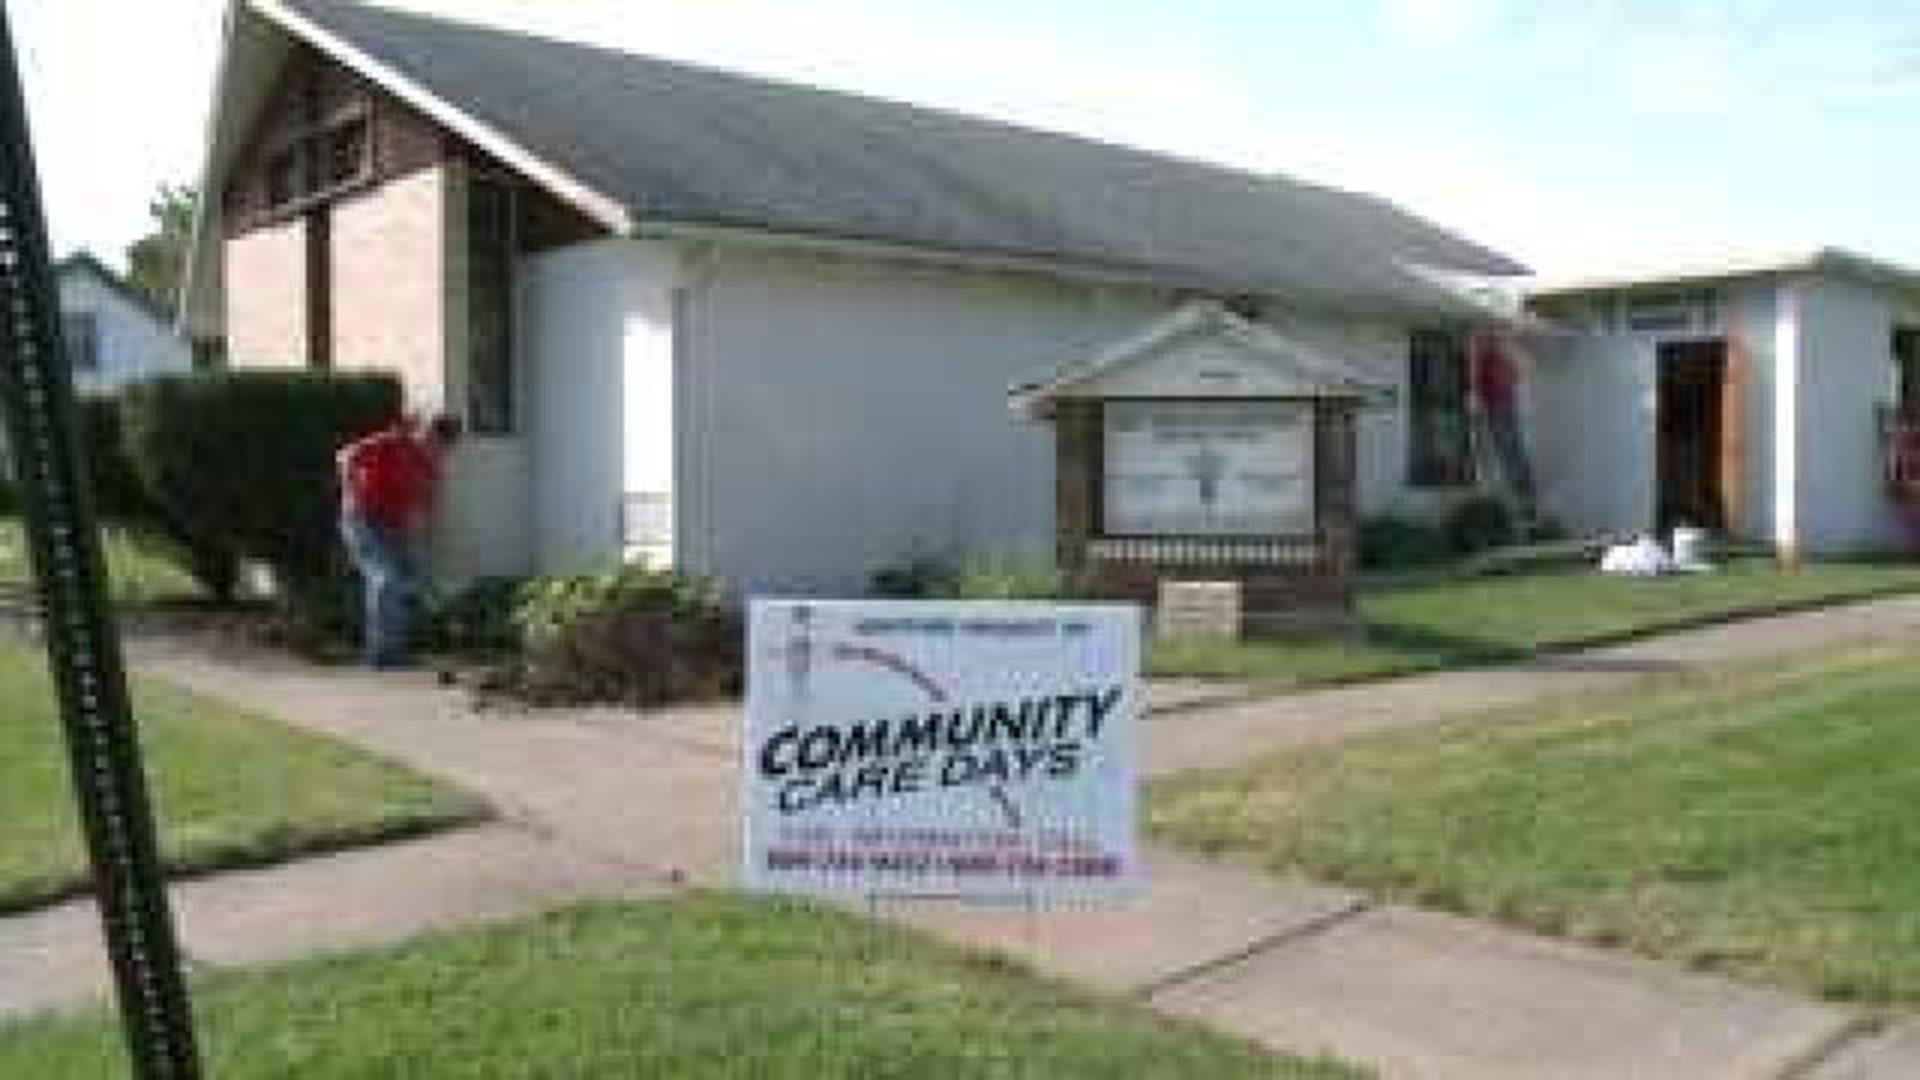 Church gets new life thanks to caring community